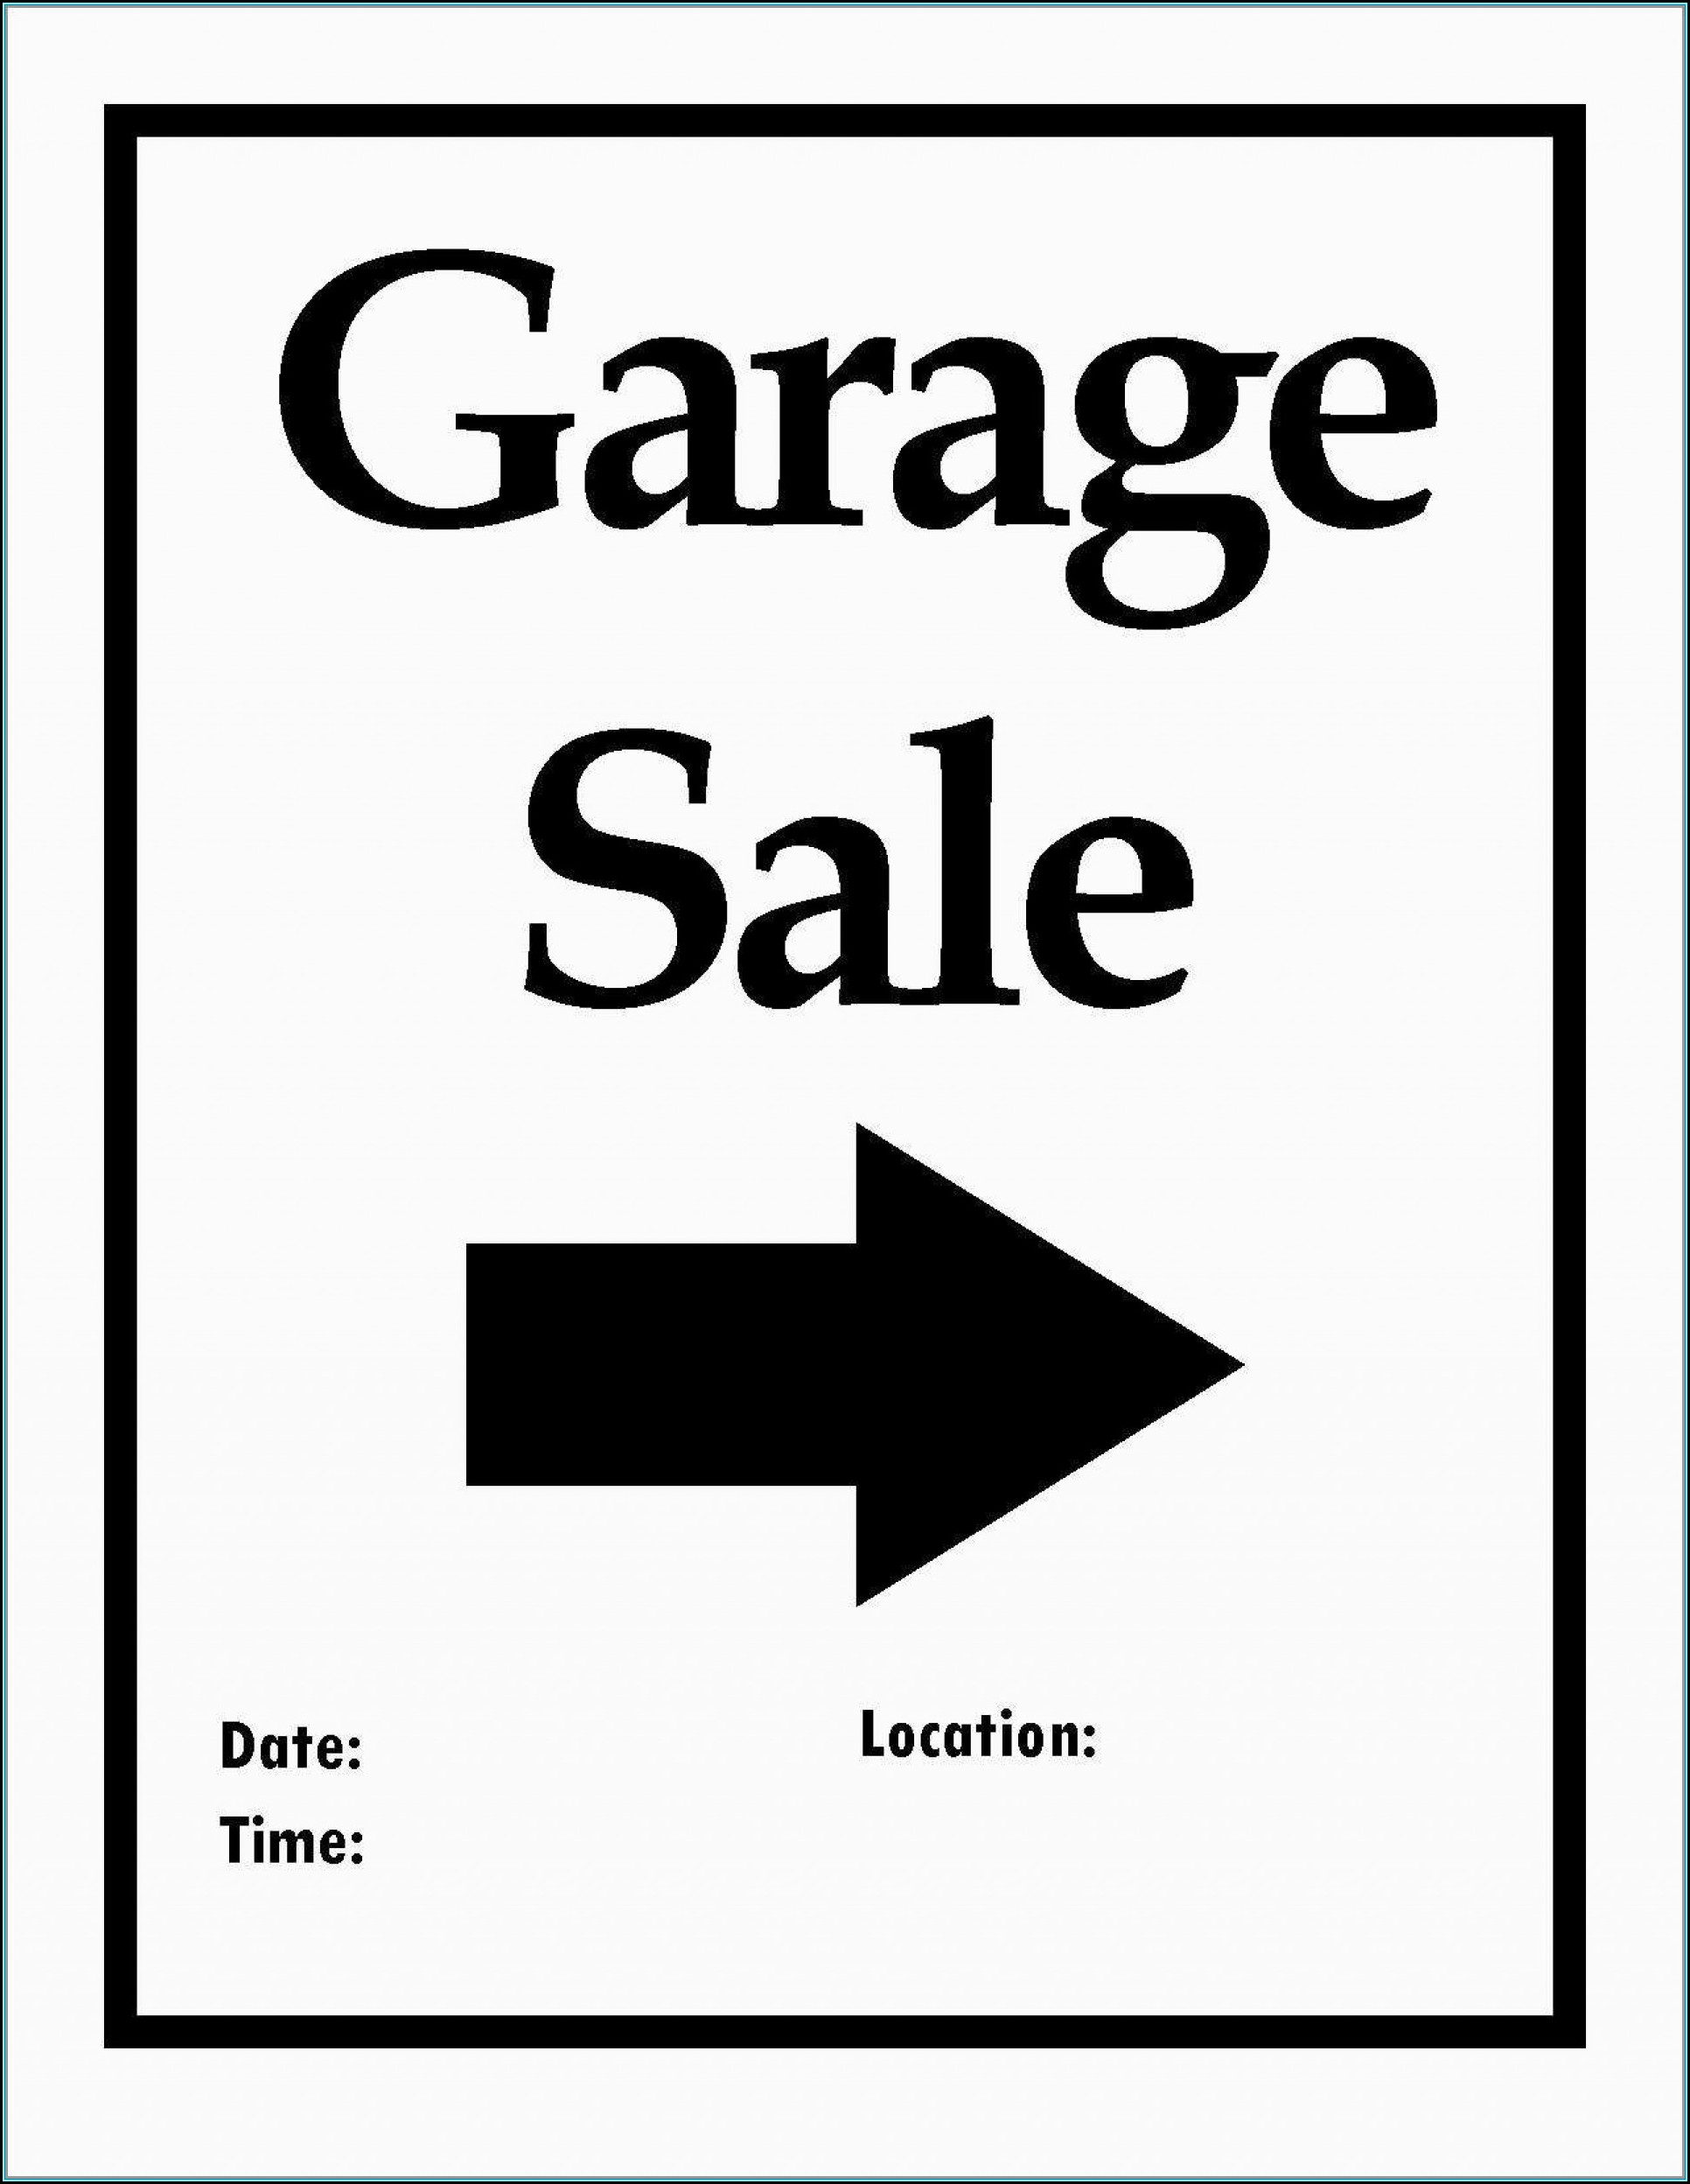 yard-sale-signs-template-760x560-png-download-pngkit